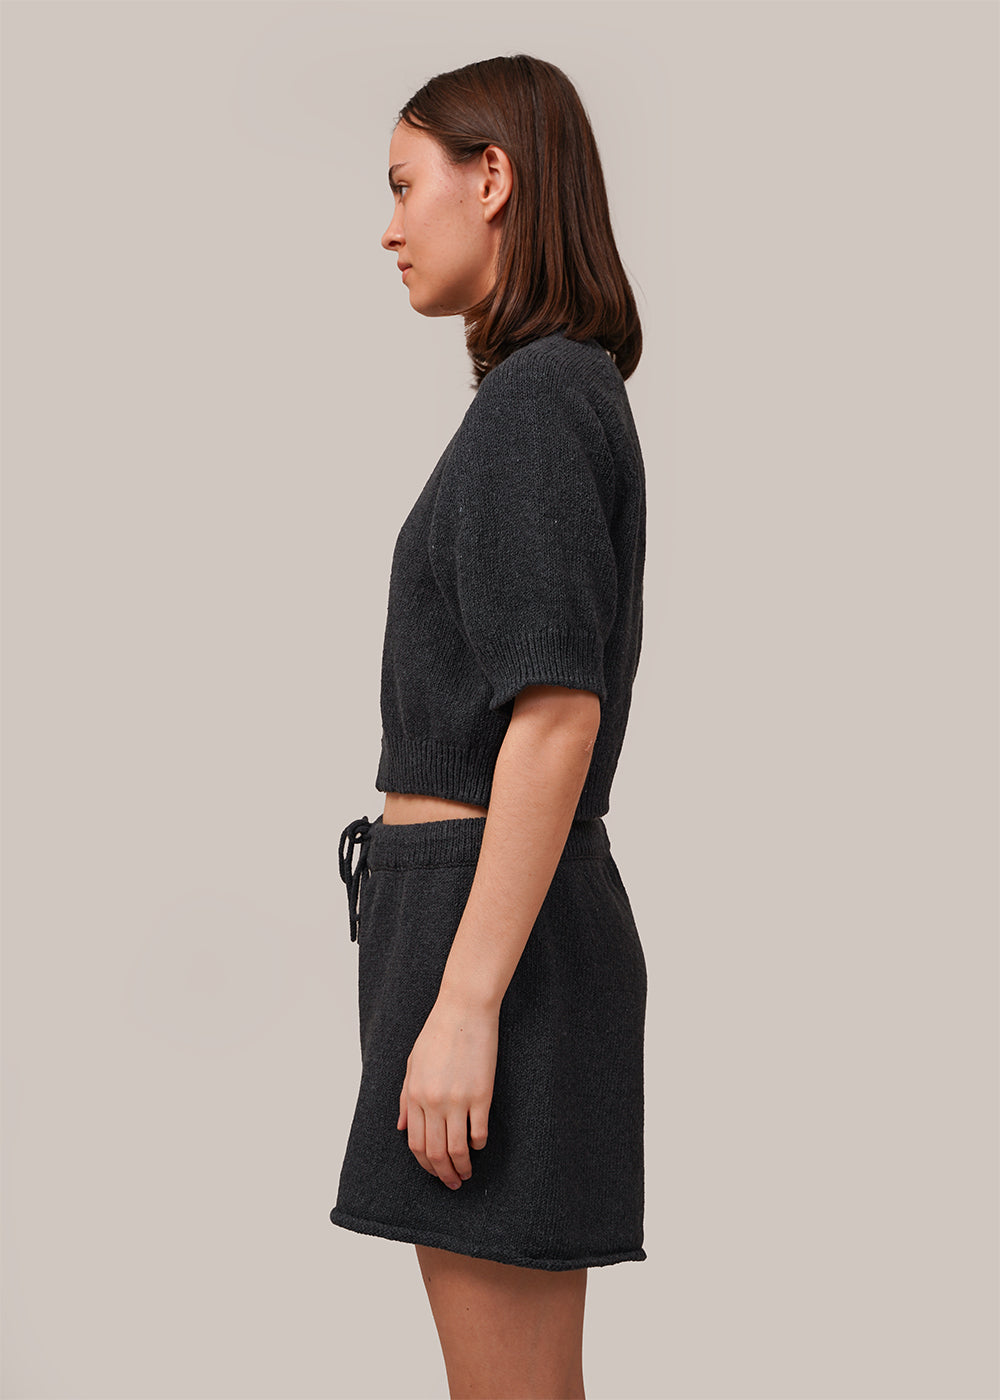 Charcoal Heather Cotton Top